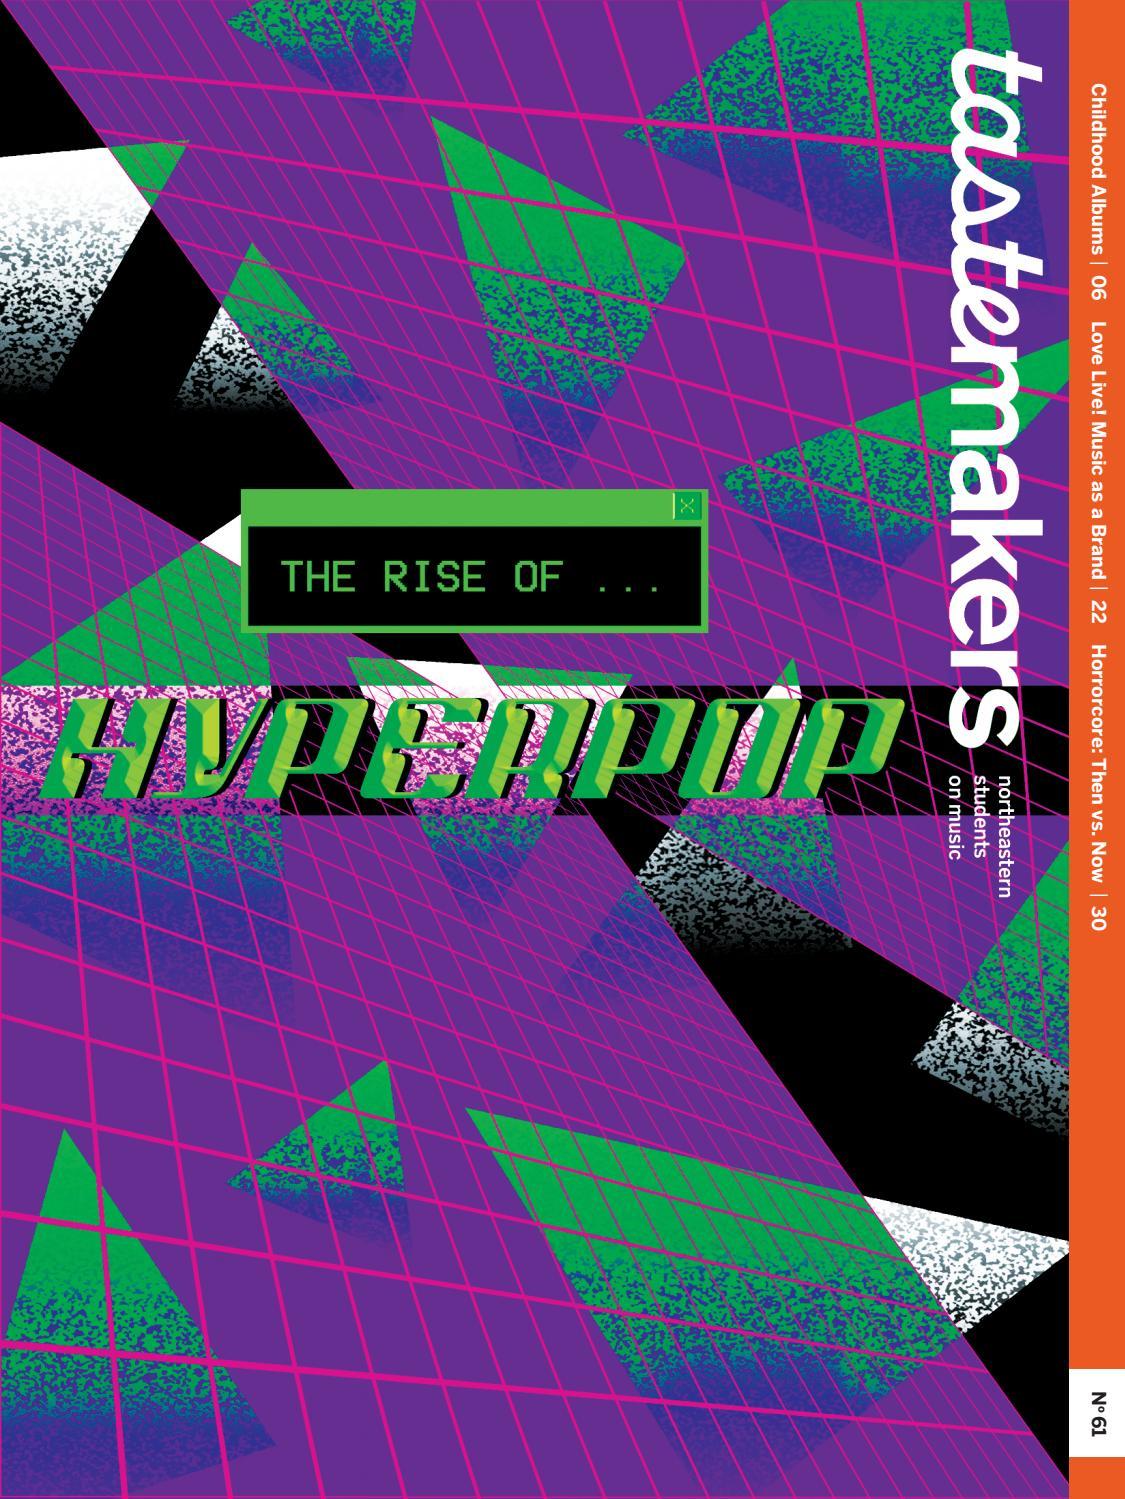 Issue 61 The Rise of Hyperpop by tastemakers   Issuu